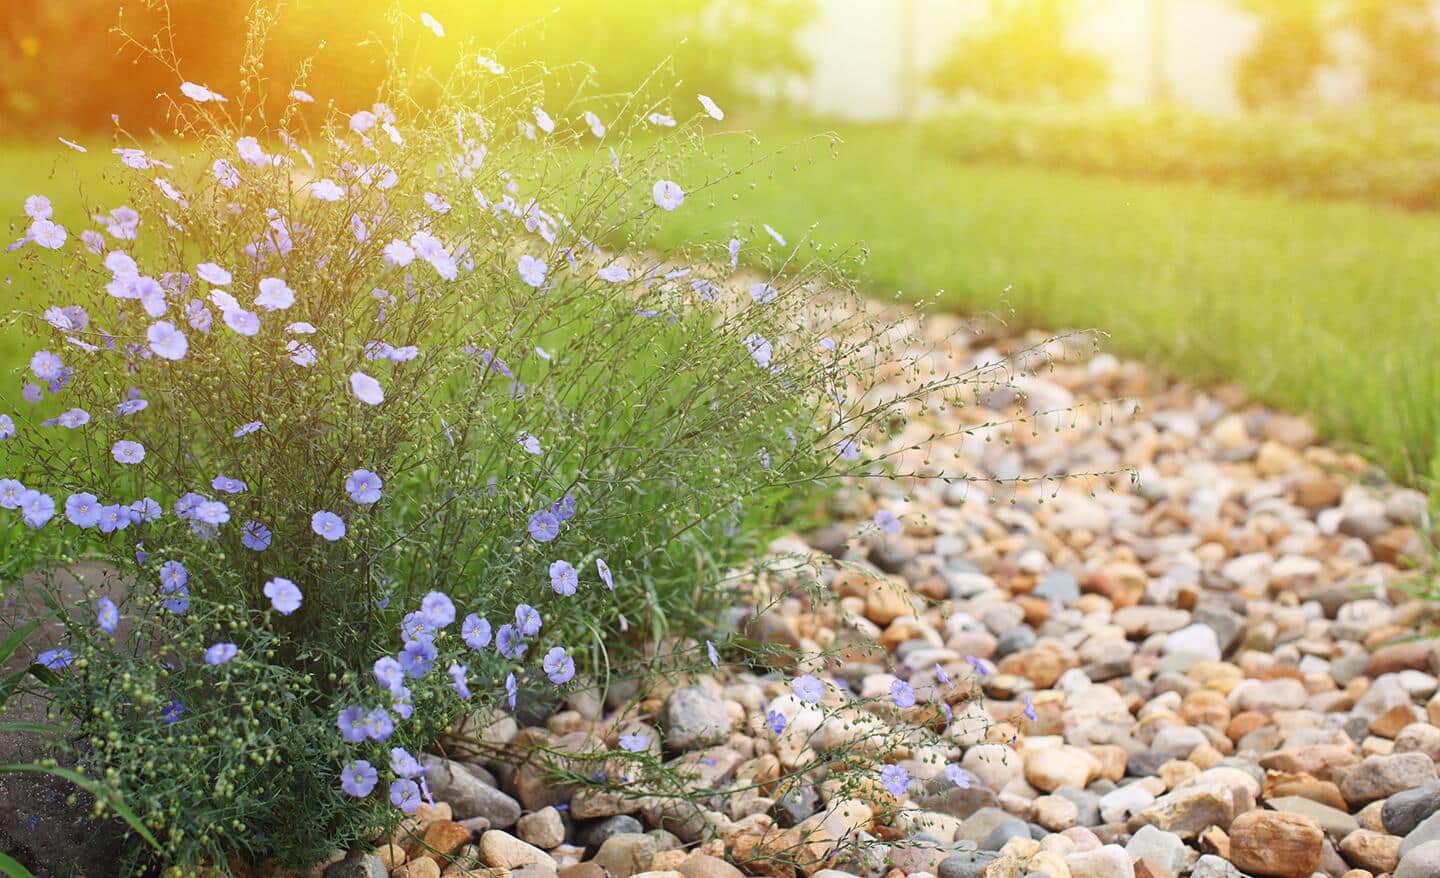 Stones cover a dry stream bed between a lawn and a flower bed